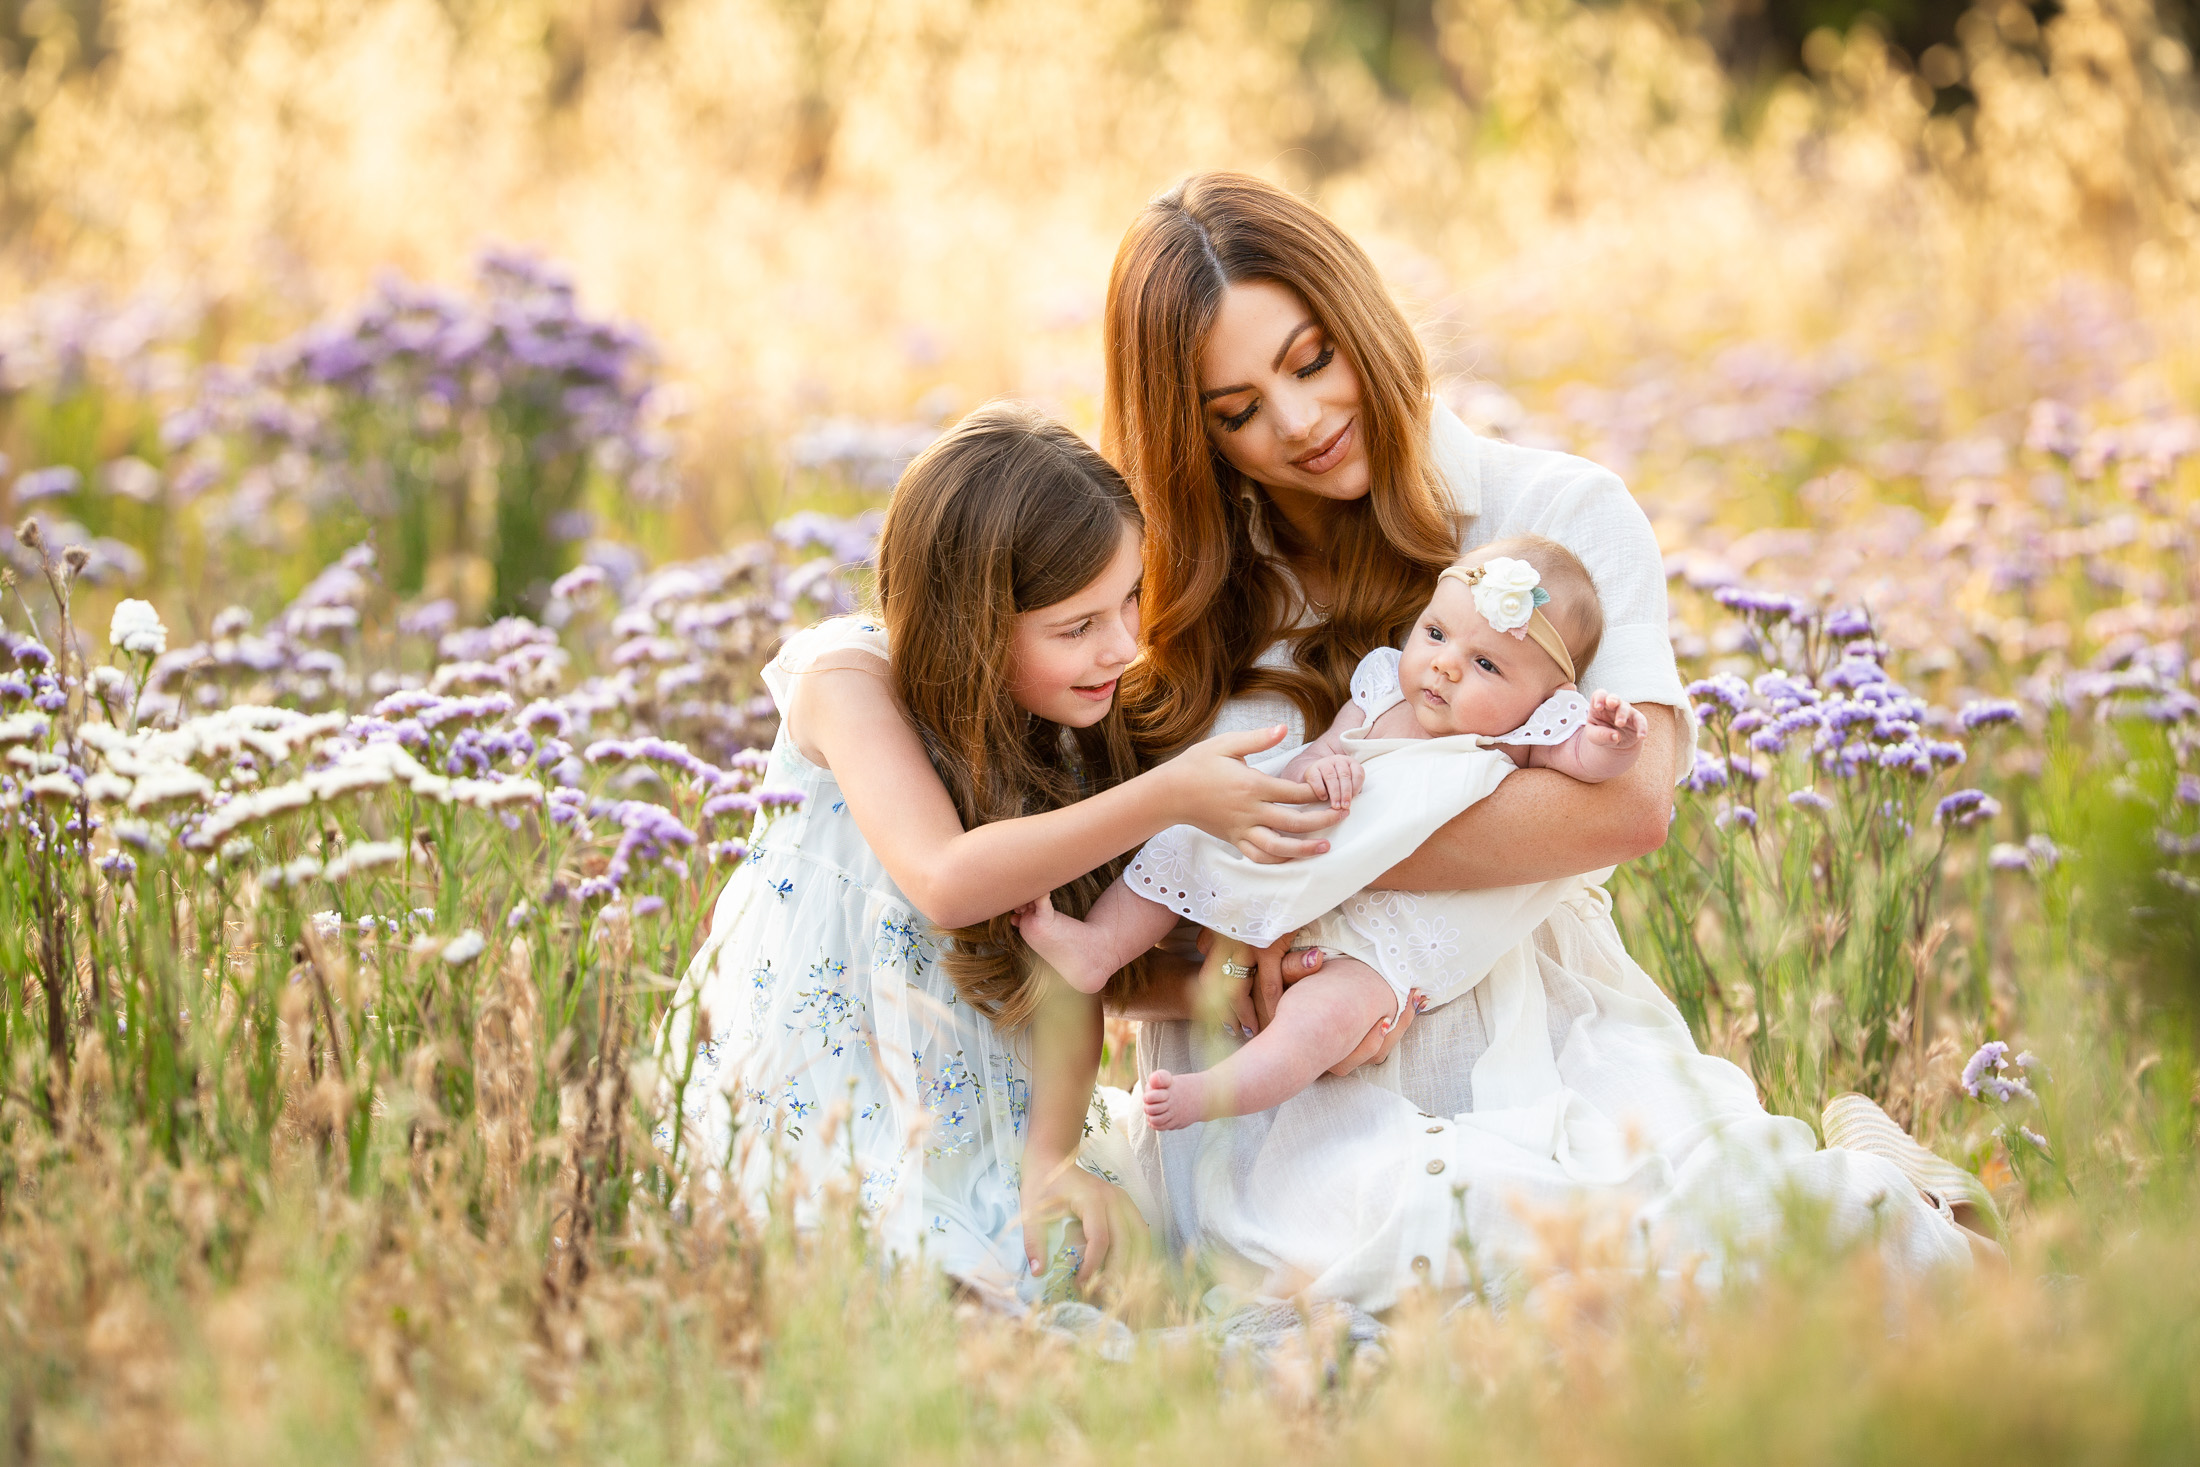 photo of a mom, daughter and young baby girl. they are all dressed in white and sitting in a purple-flower field